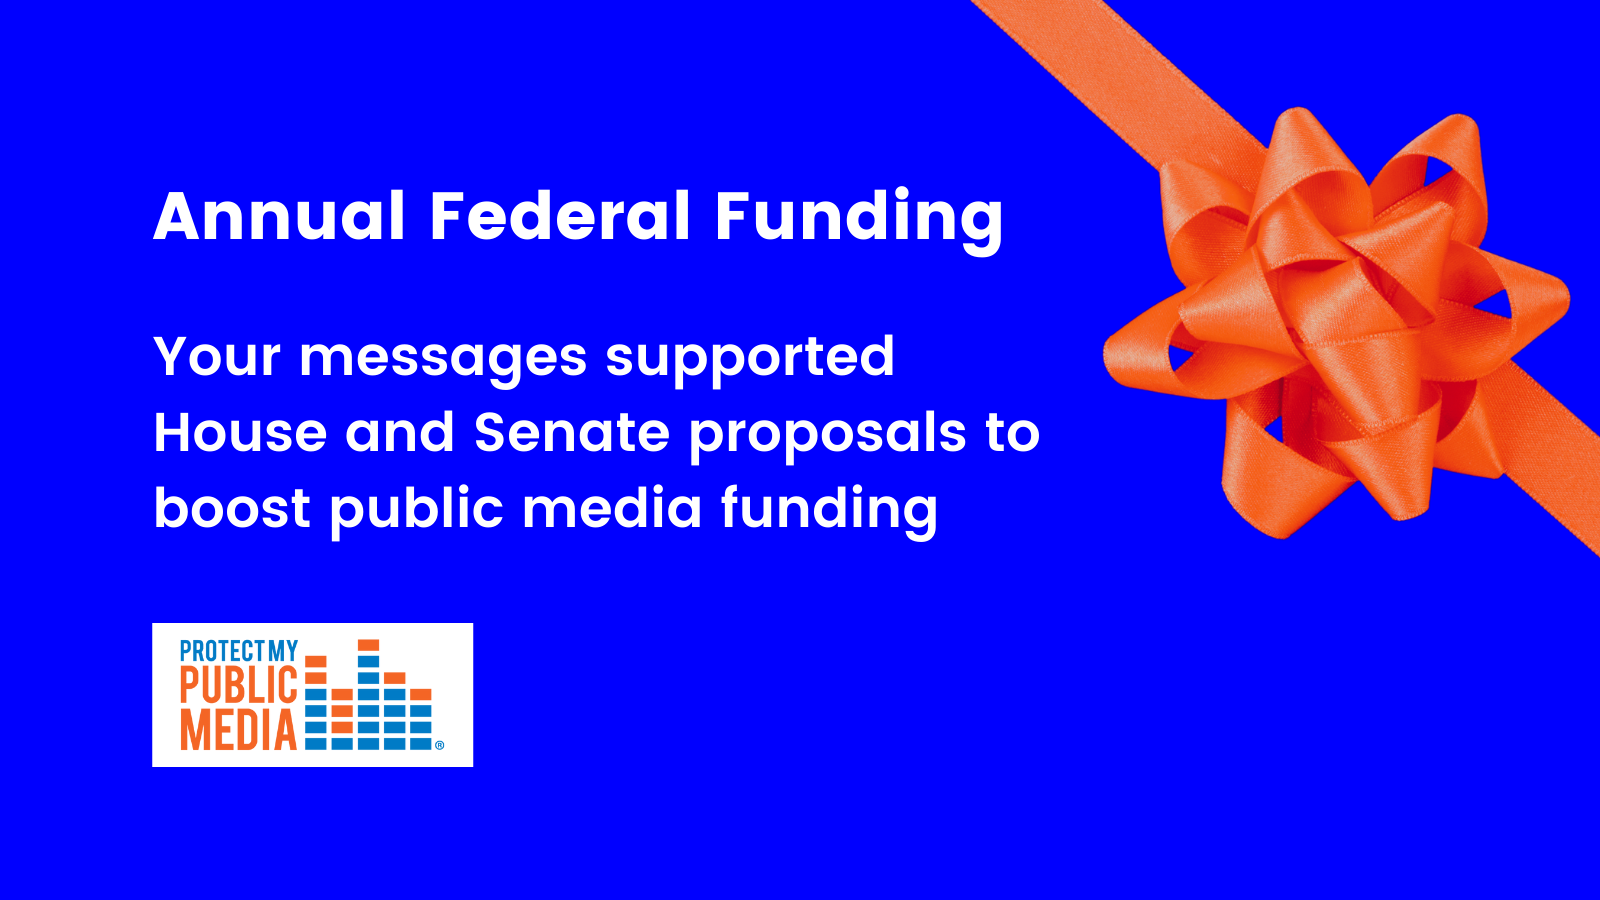 Your messages supported House and Senate proposals to boost public media funding.